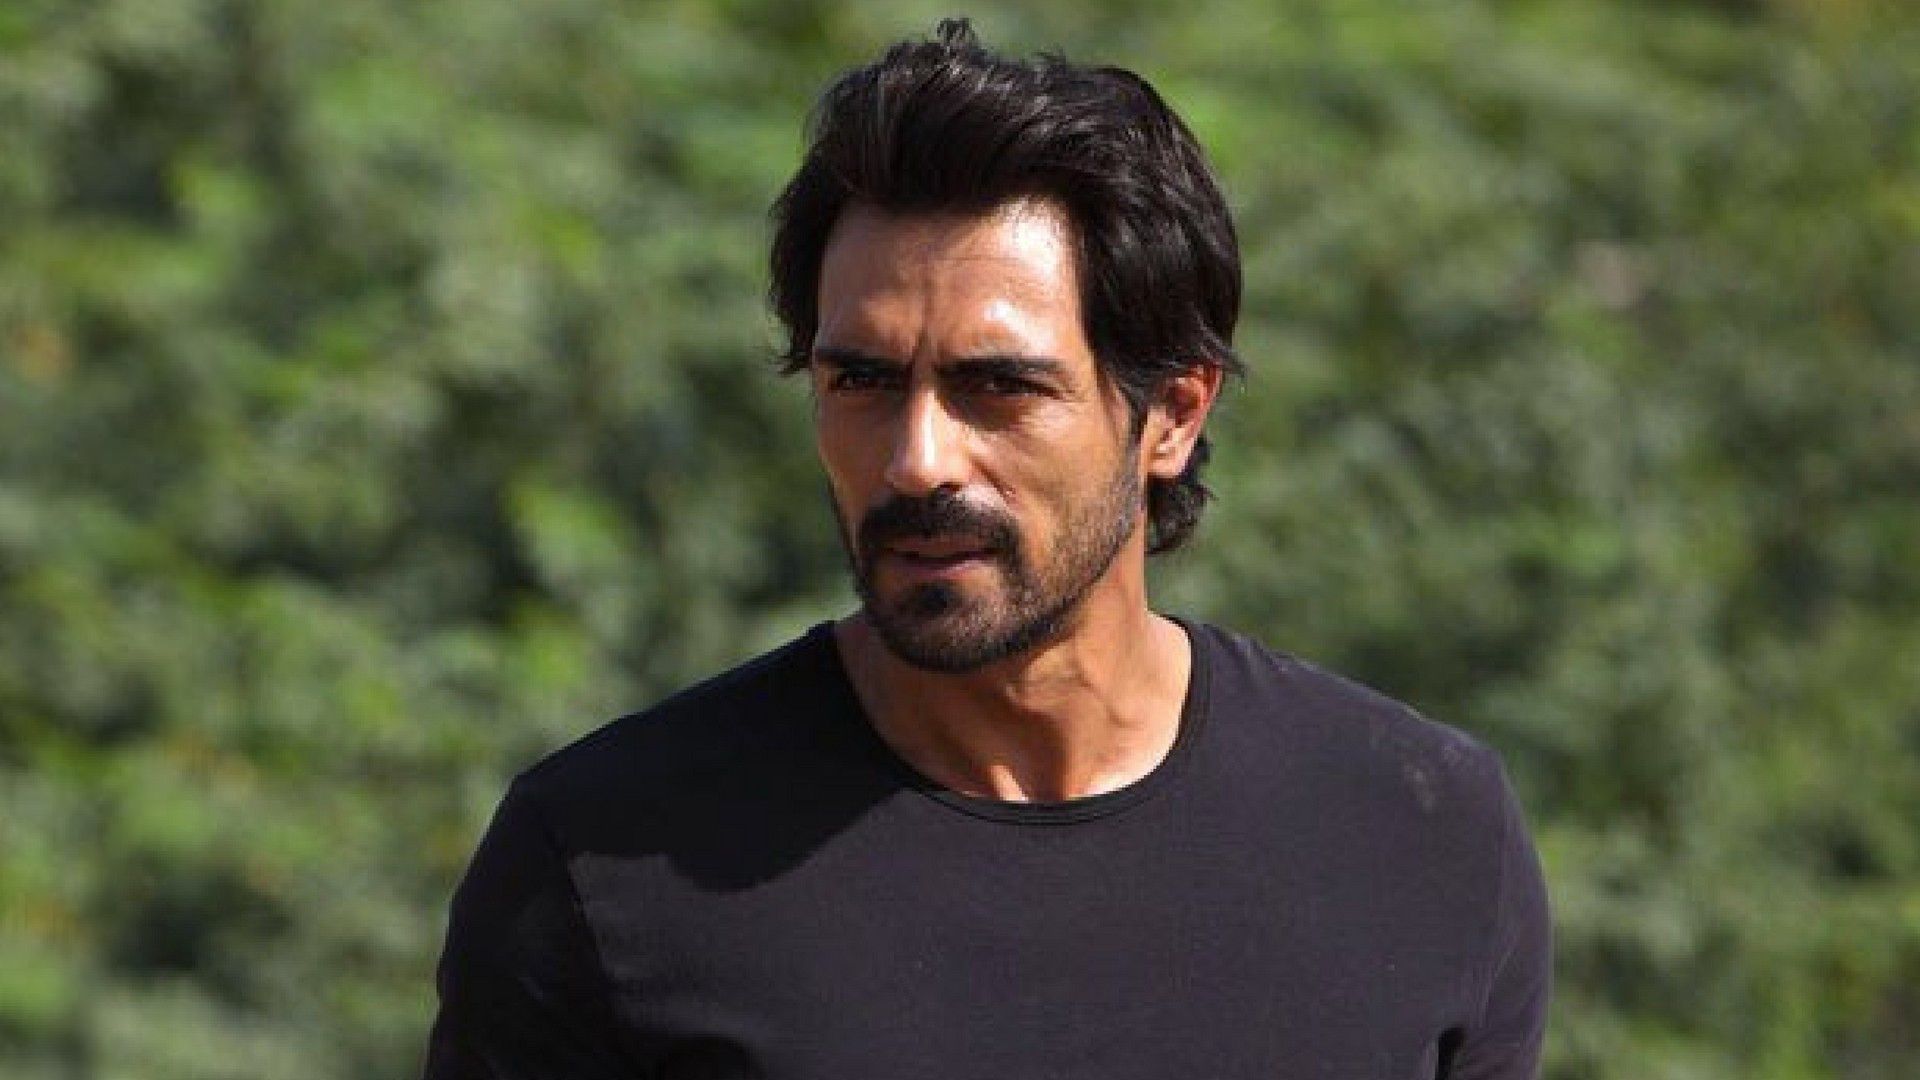 Arjun Rampal Latest Full HD Wallpapers And Images - 1080p 